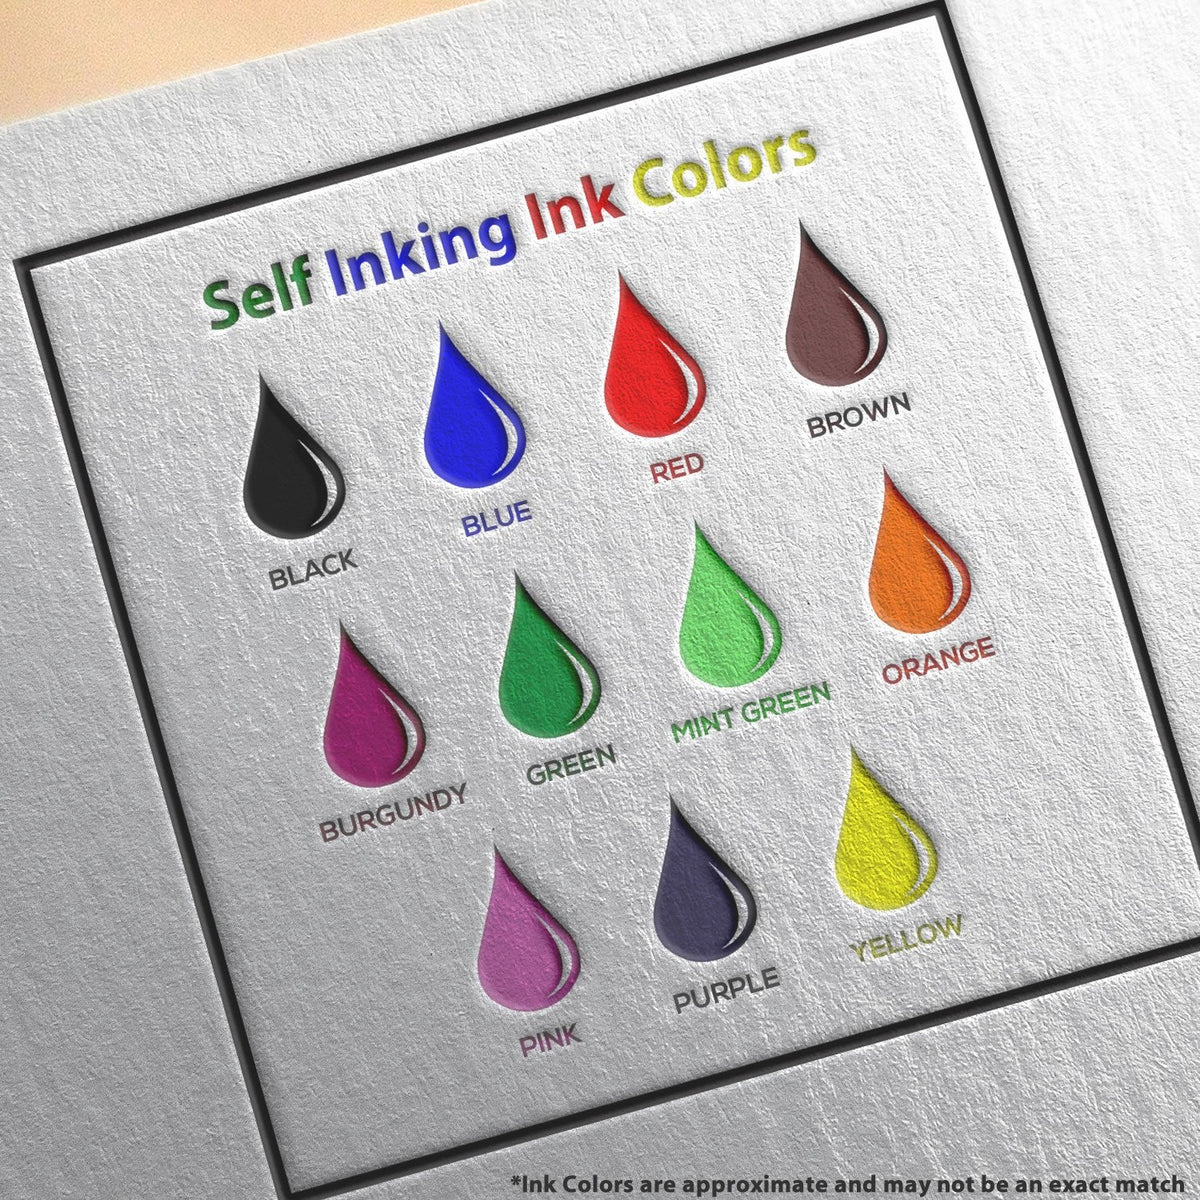 Self-Inking Refused Stamp Ink Color Options